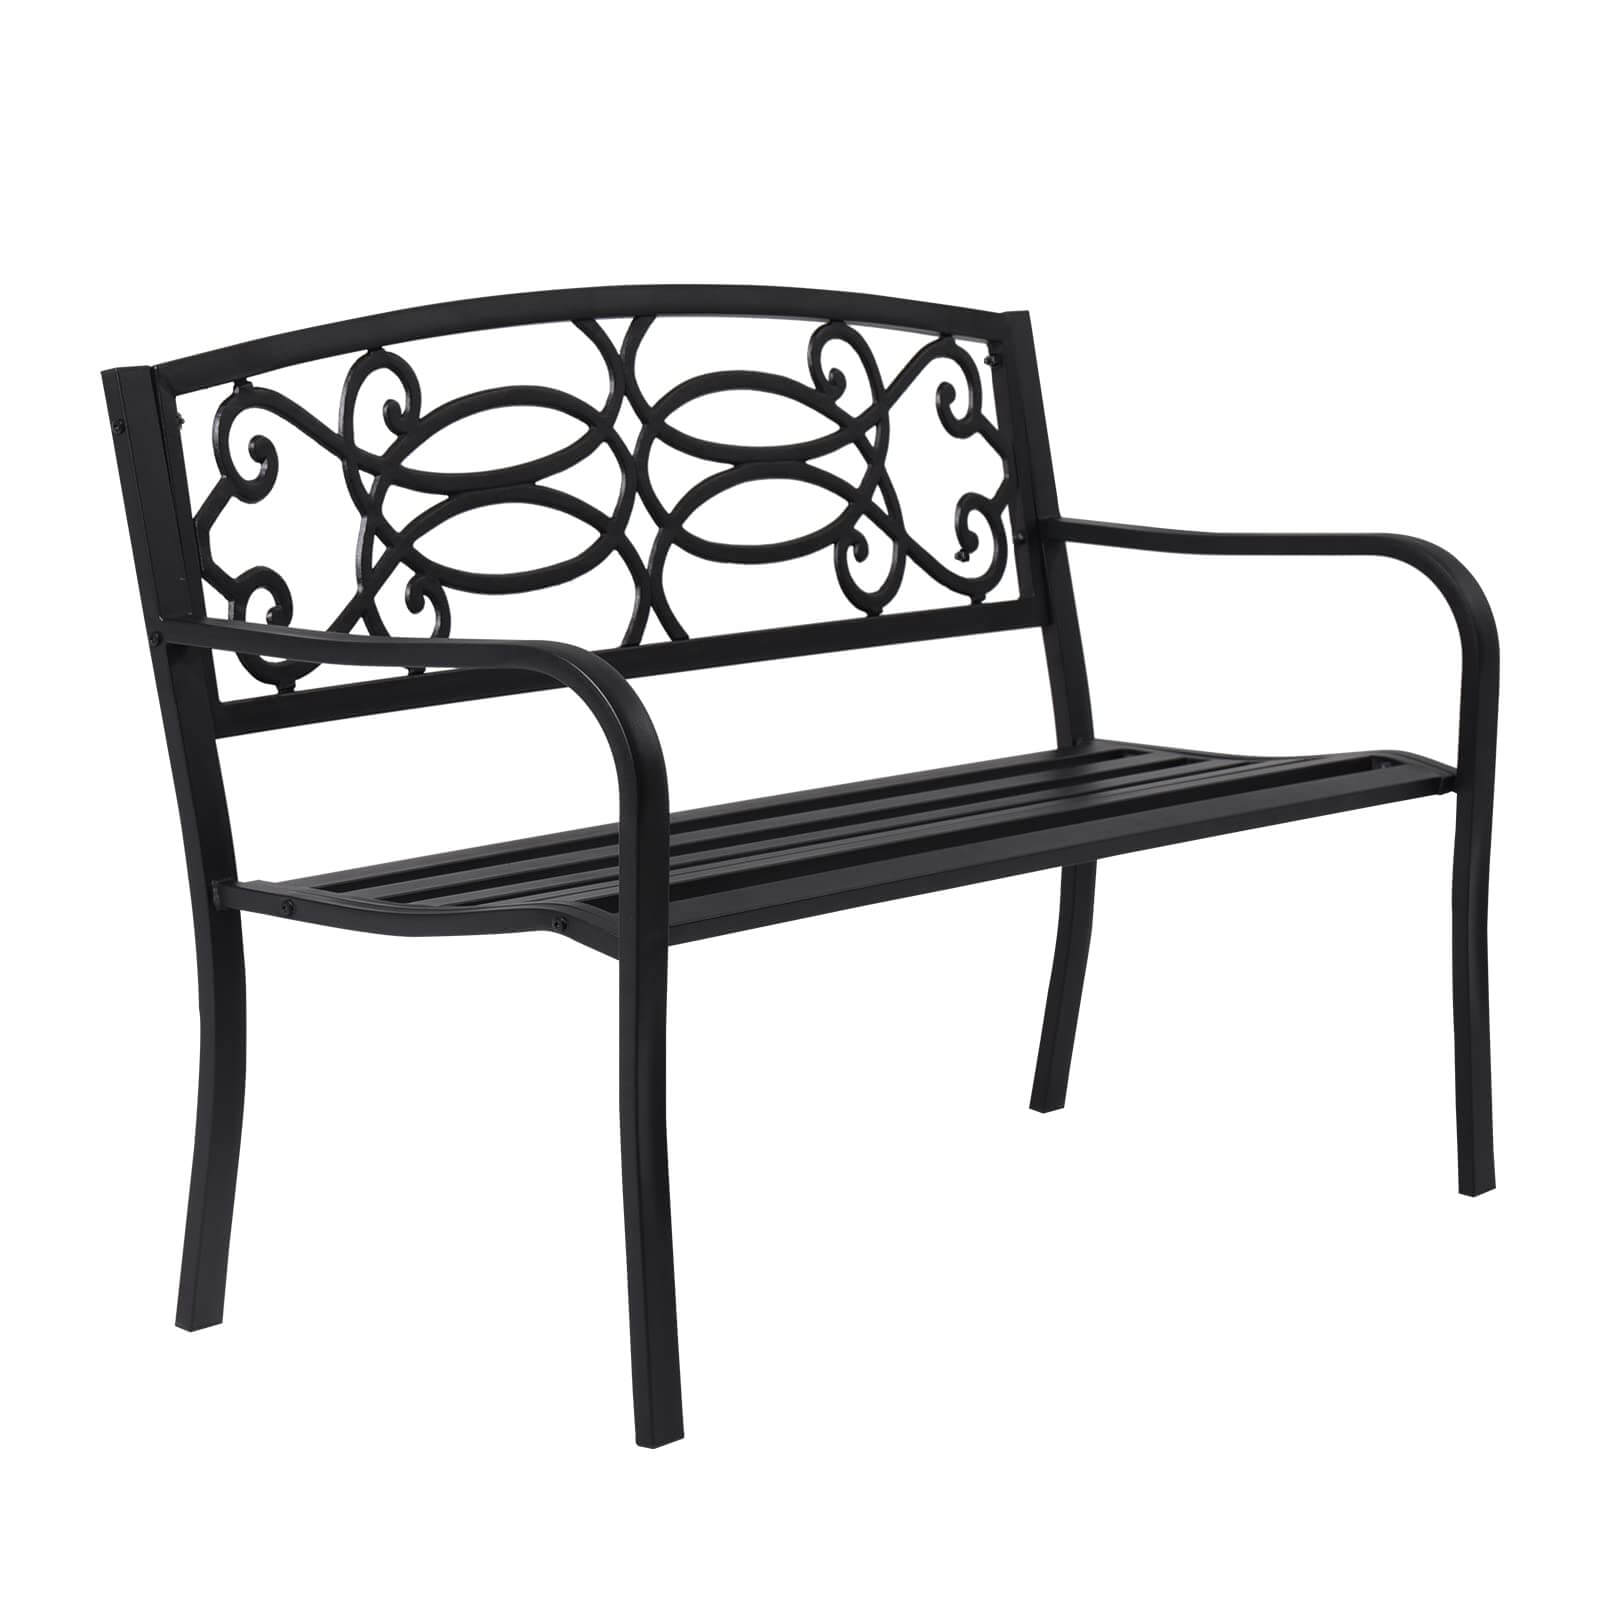 Outdoor Garden Bench with Slatted Seat & Steel Metal Frame, Patio Seating for Porch, Outside, Park